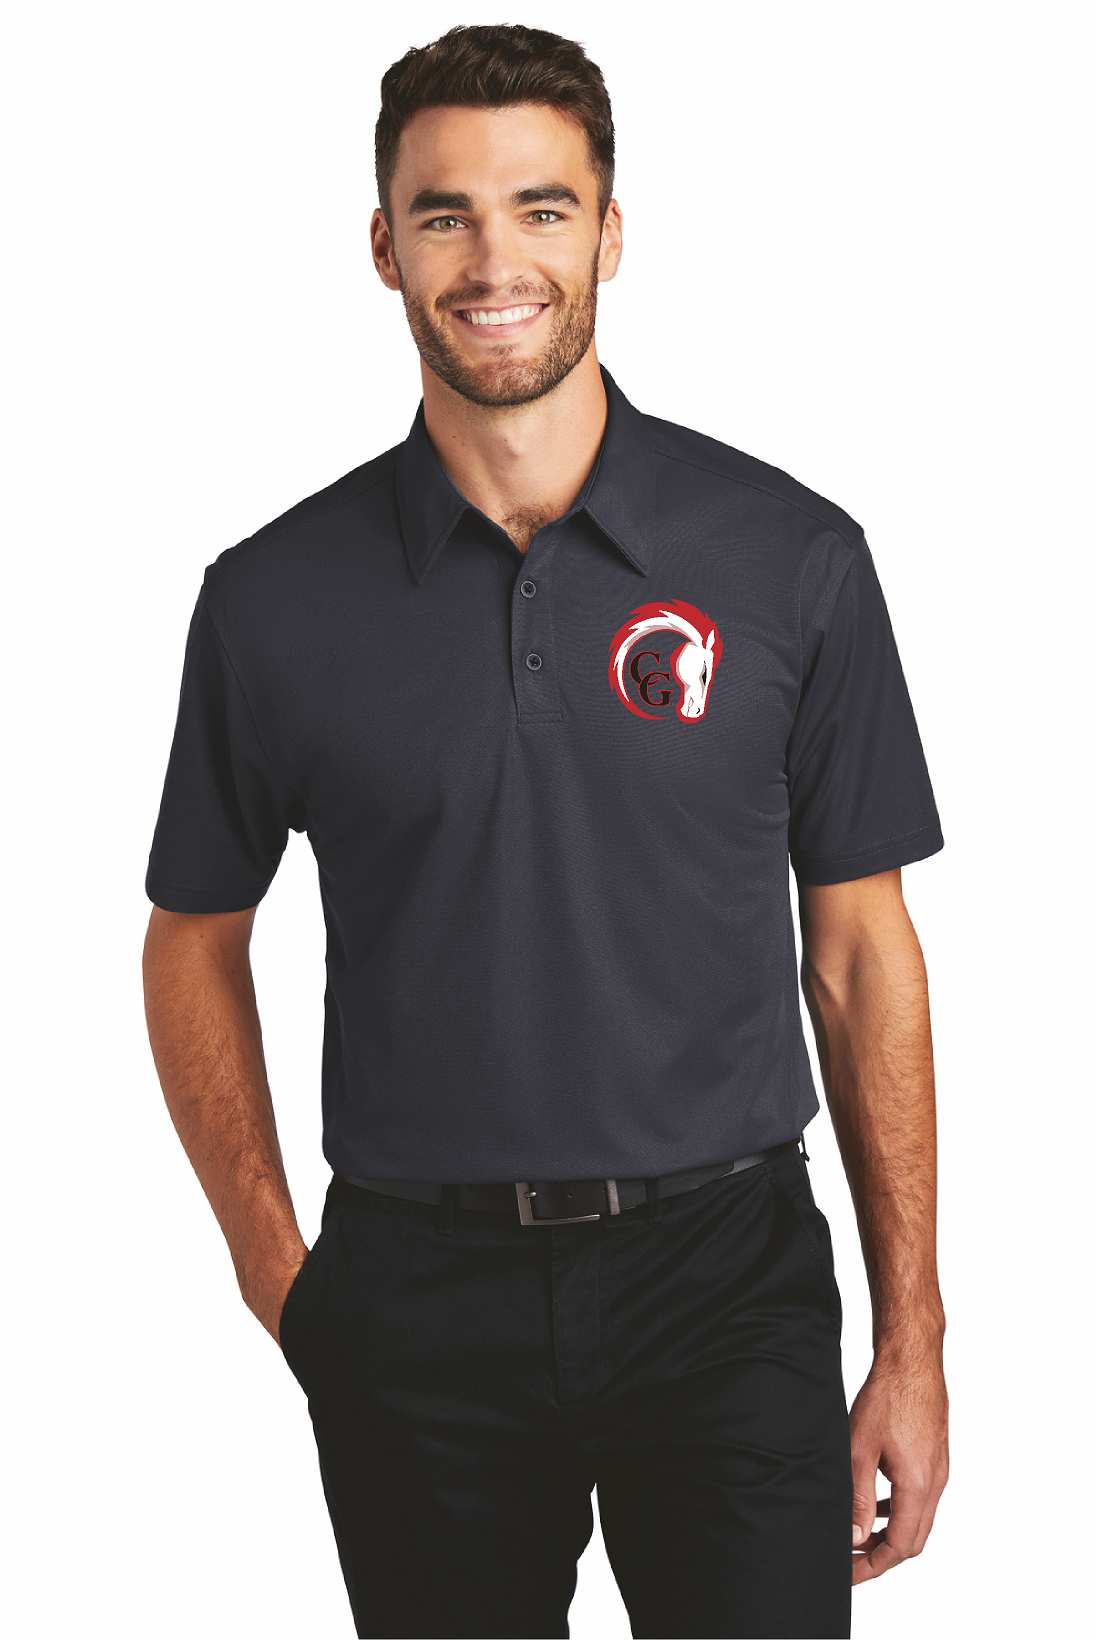 CG Chargers Mens Port Authority Dimension Polo K571